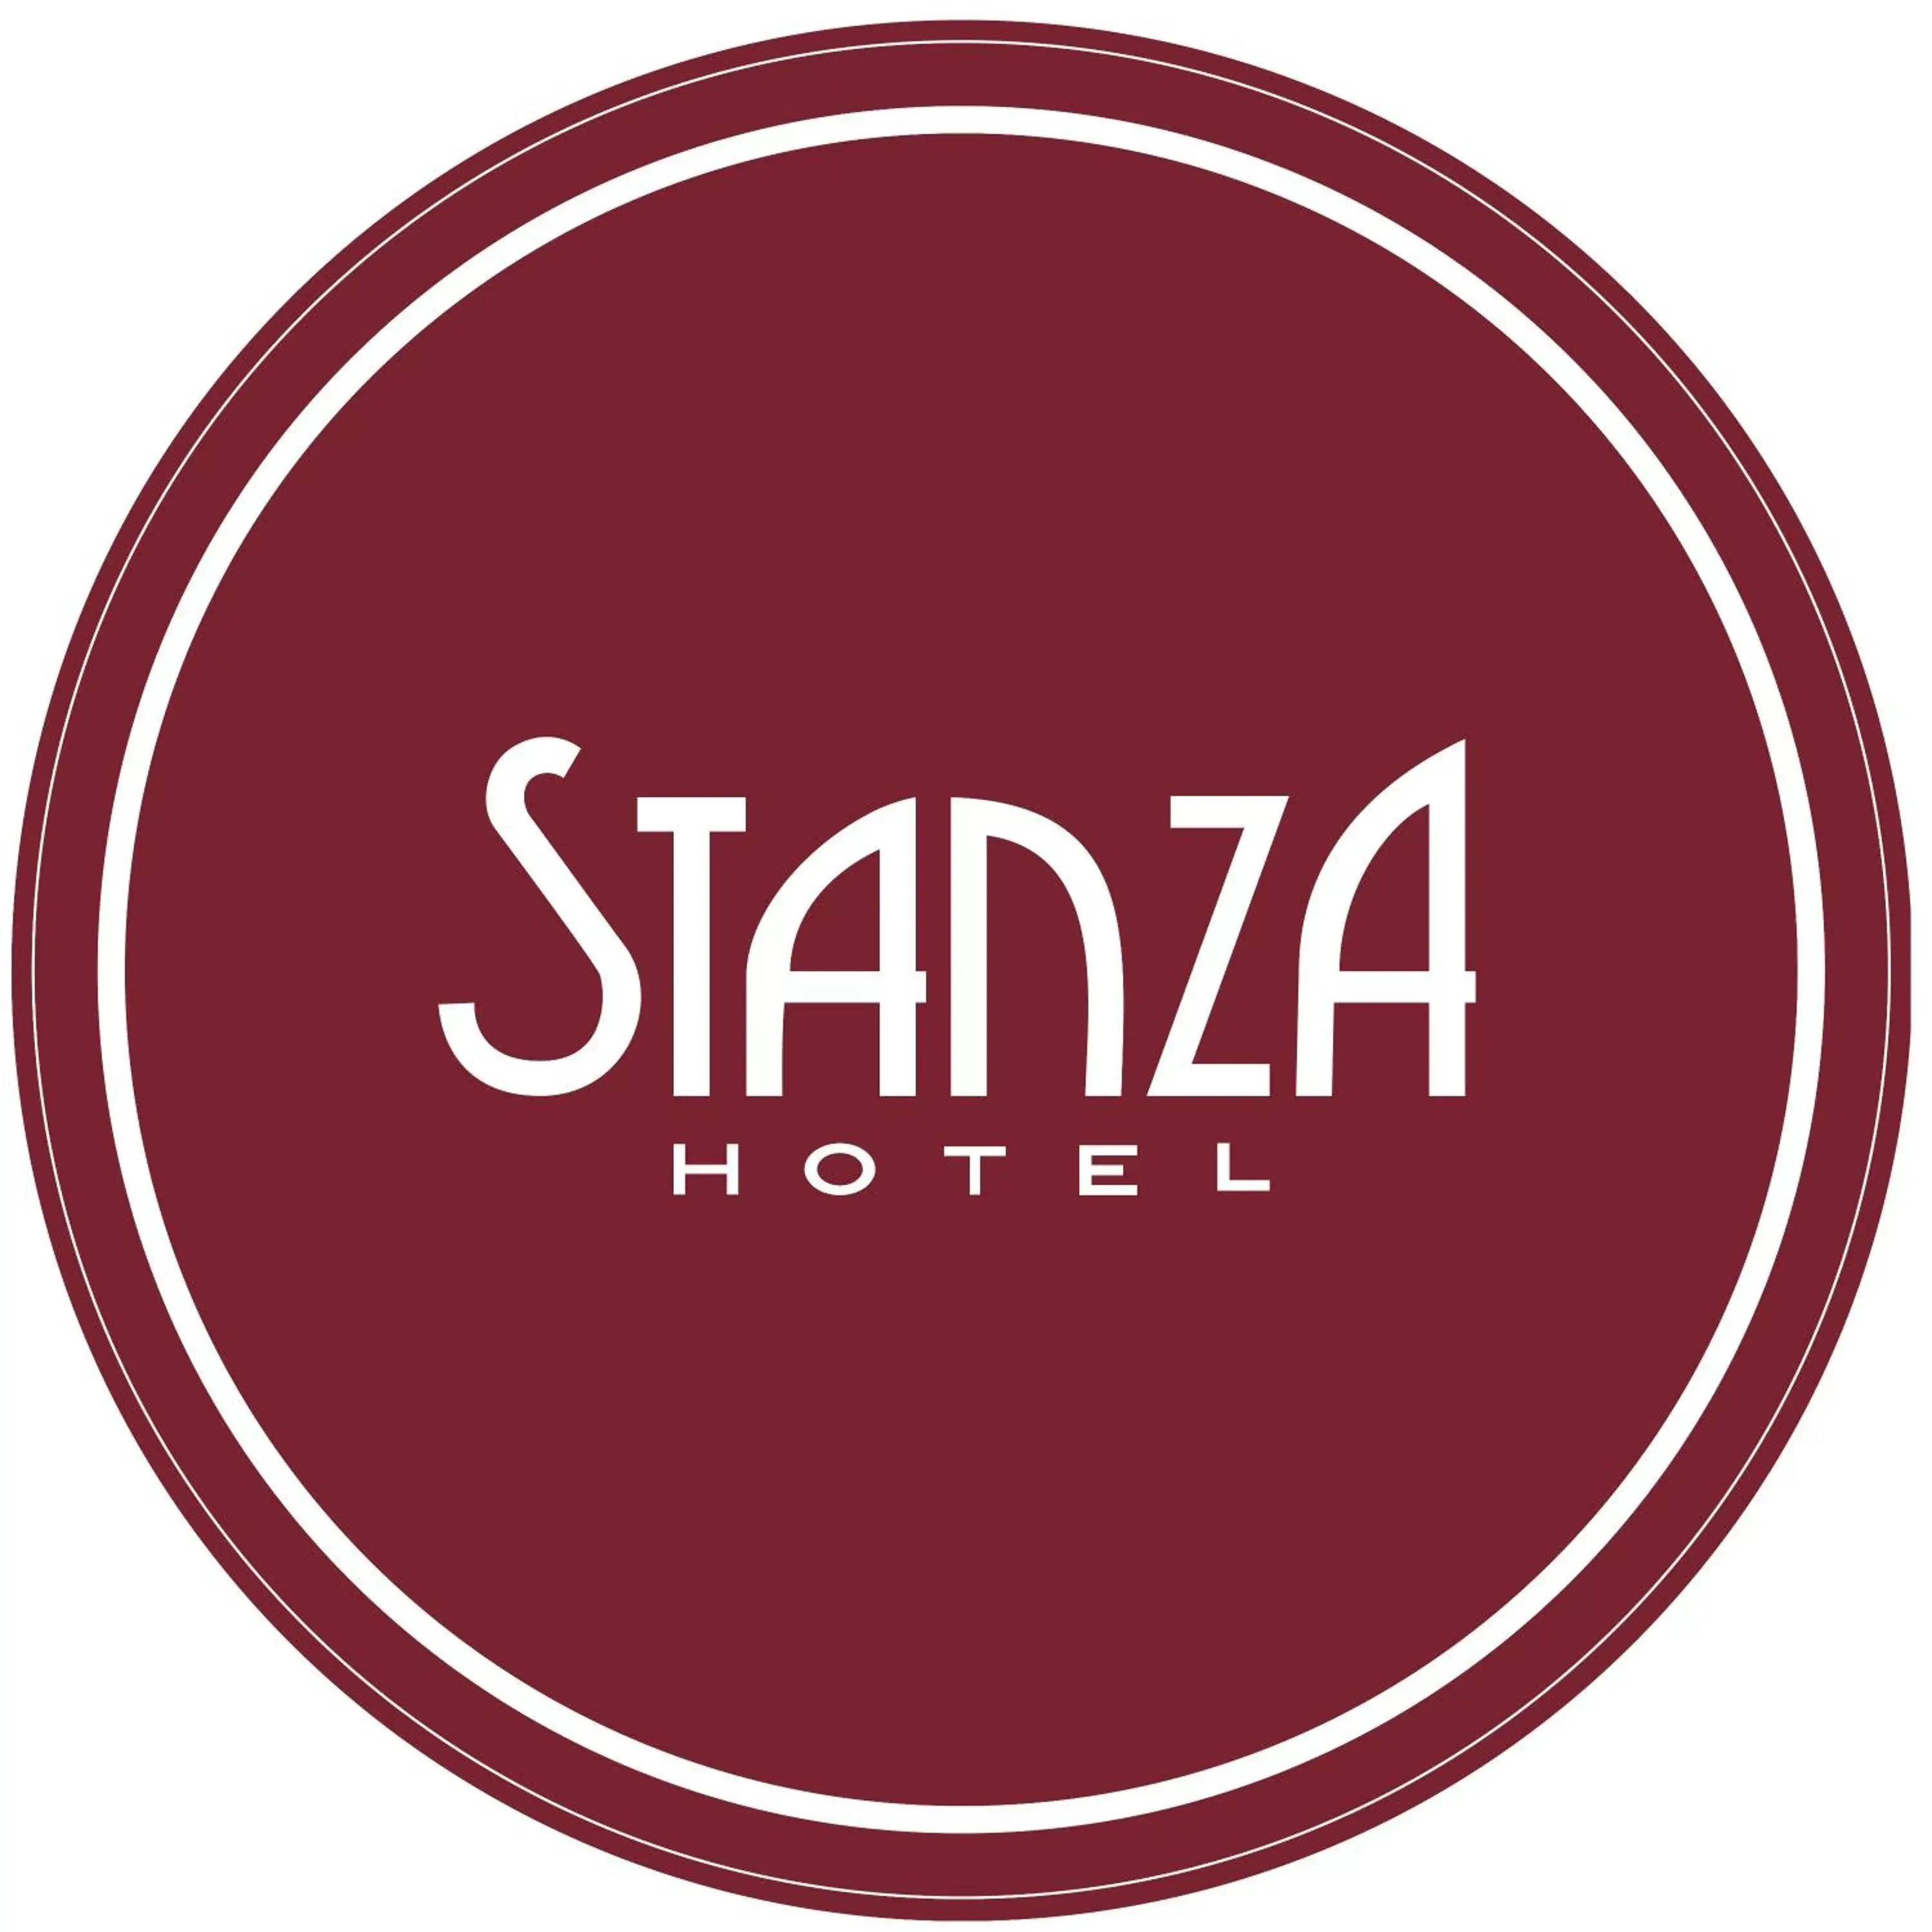 Property logo or sign in Stanza Hotel